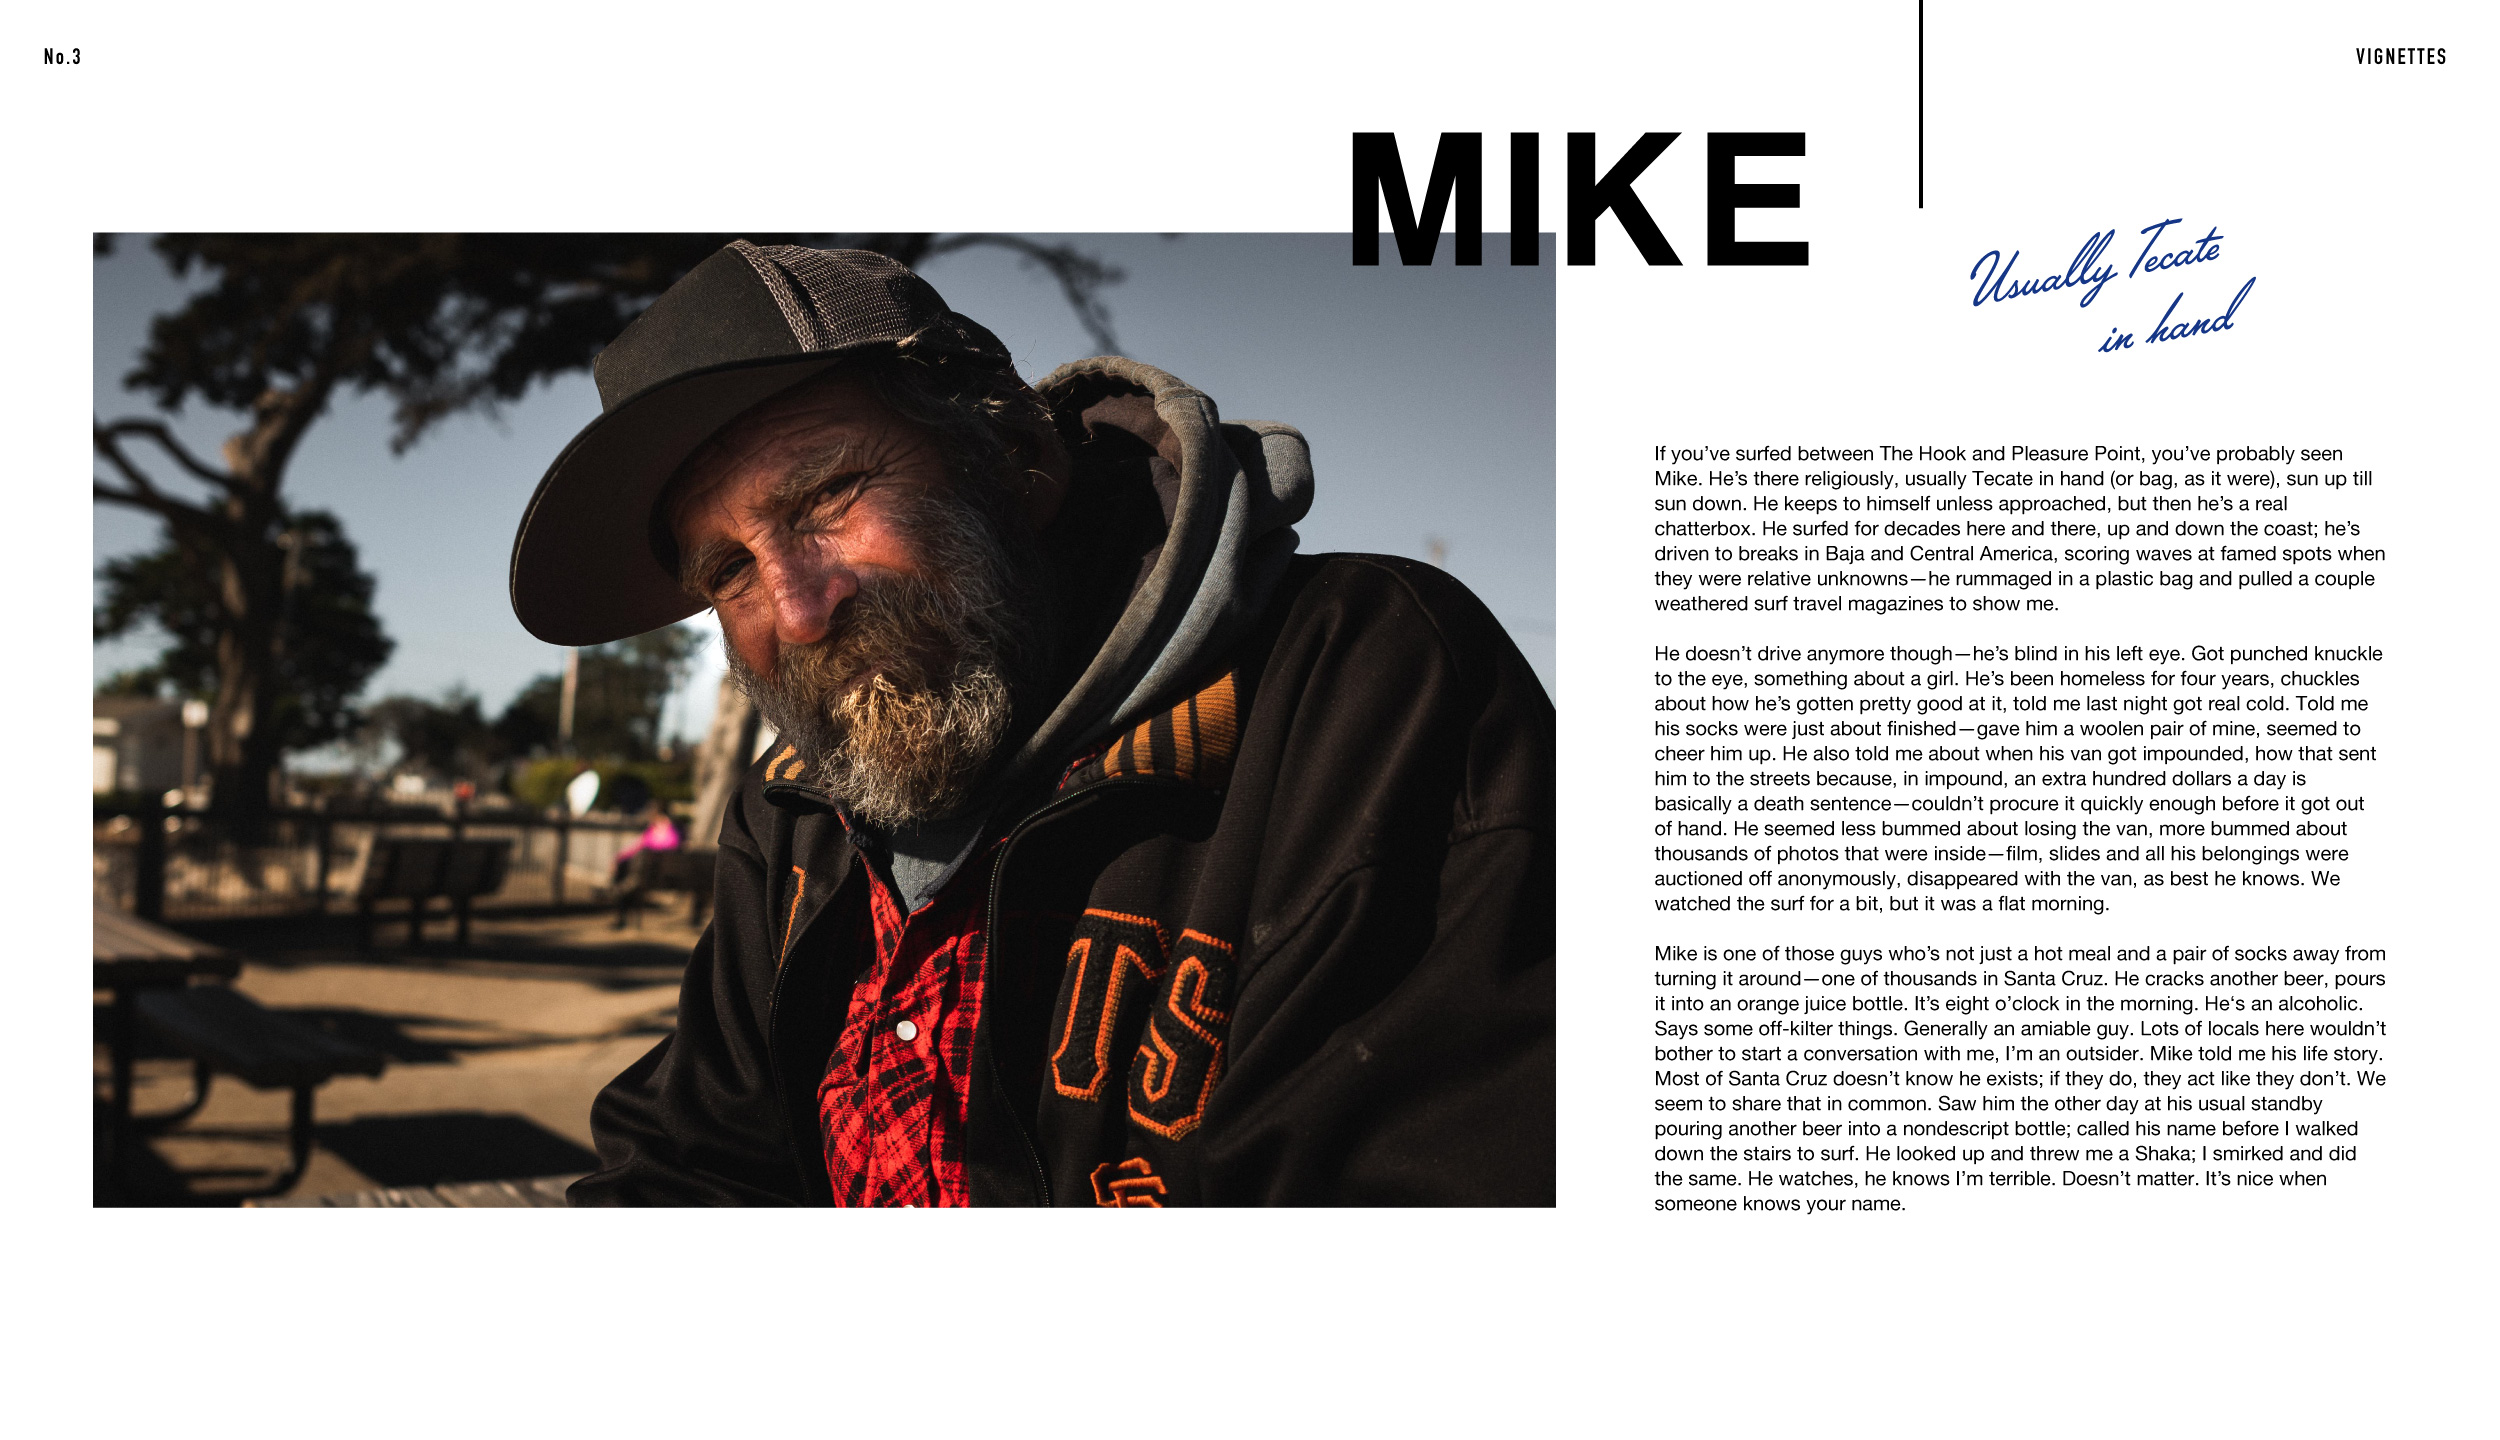 Tufts_Vignettes_Mike